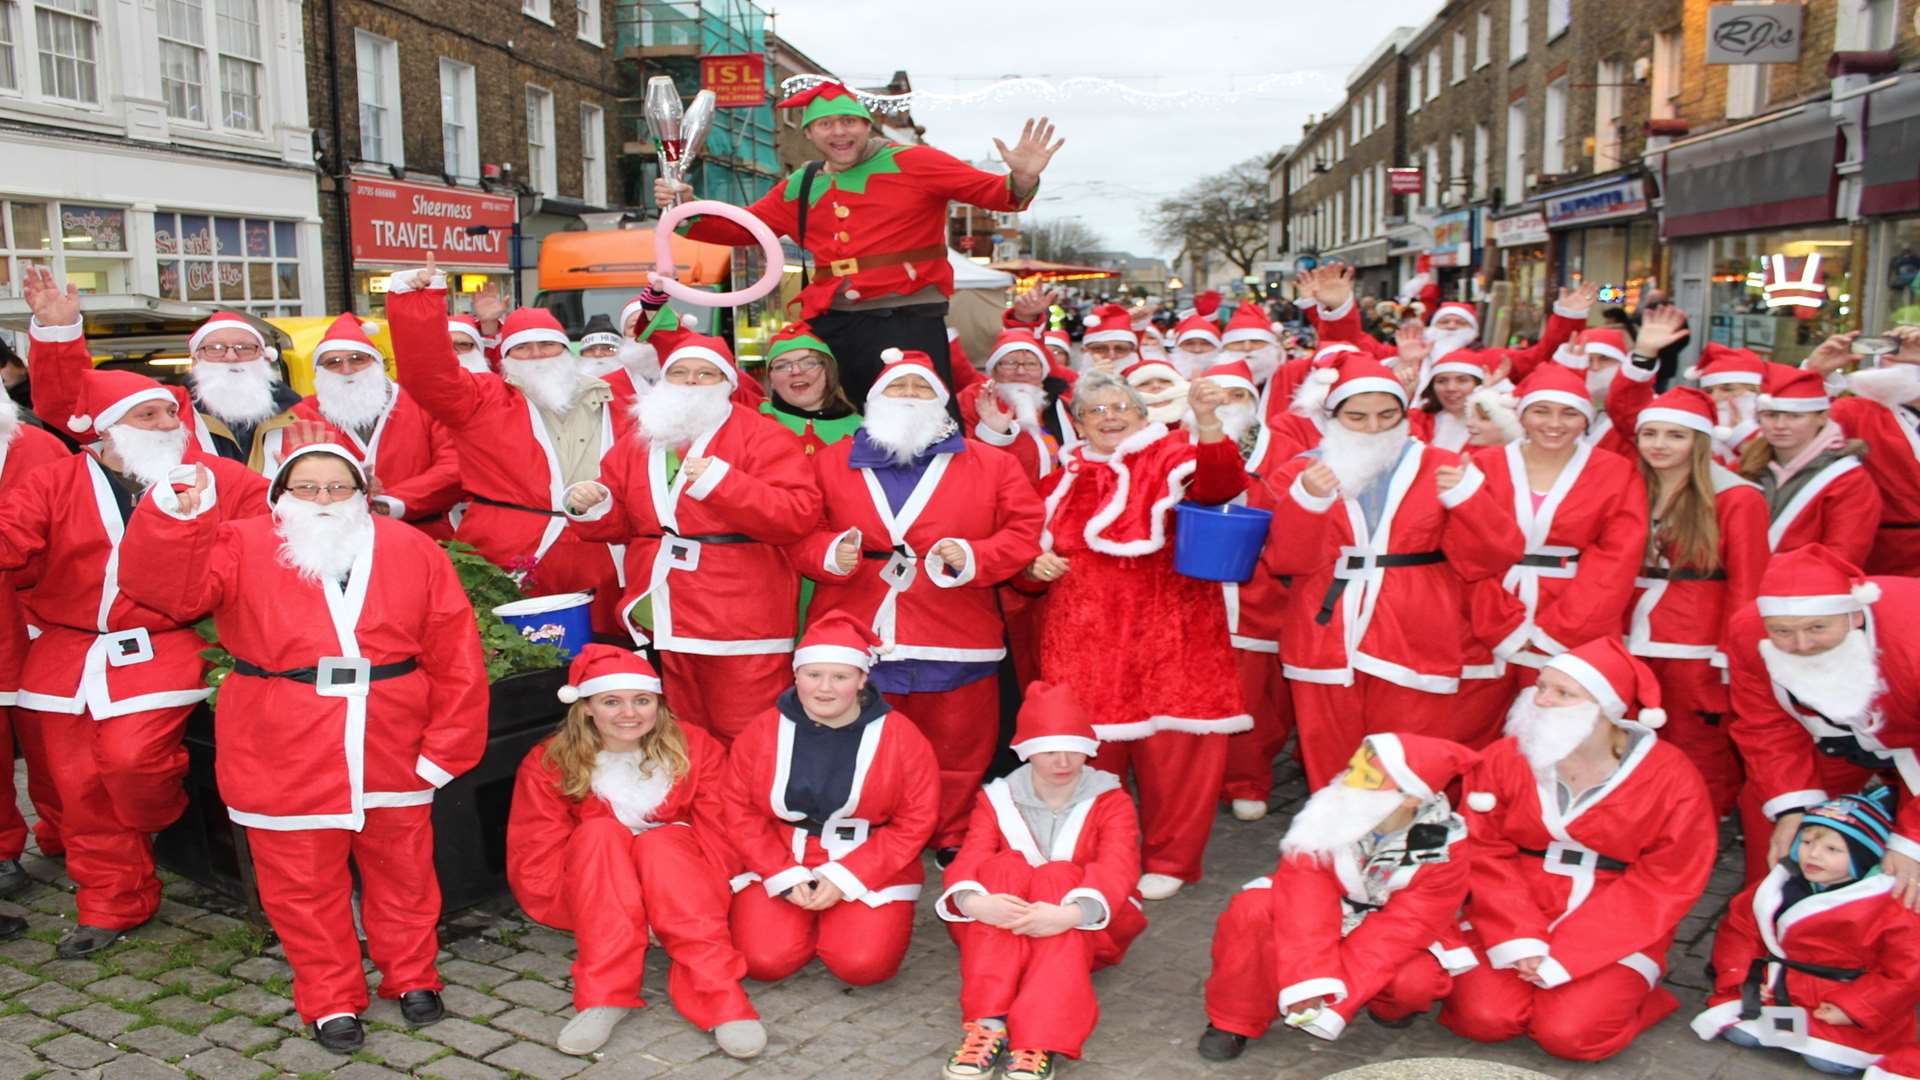 Applications needed for Sheppey's third Santa Saunter at Sheerness on Saturday December 2